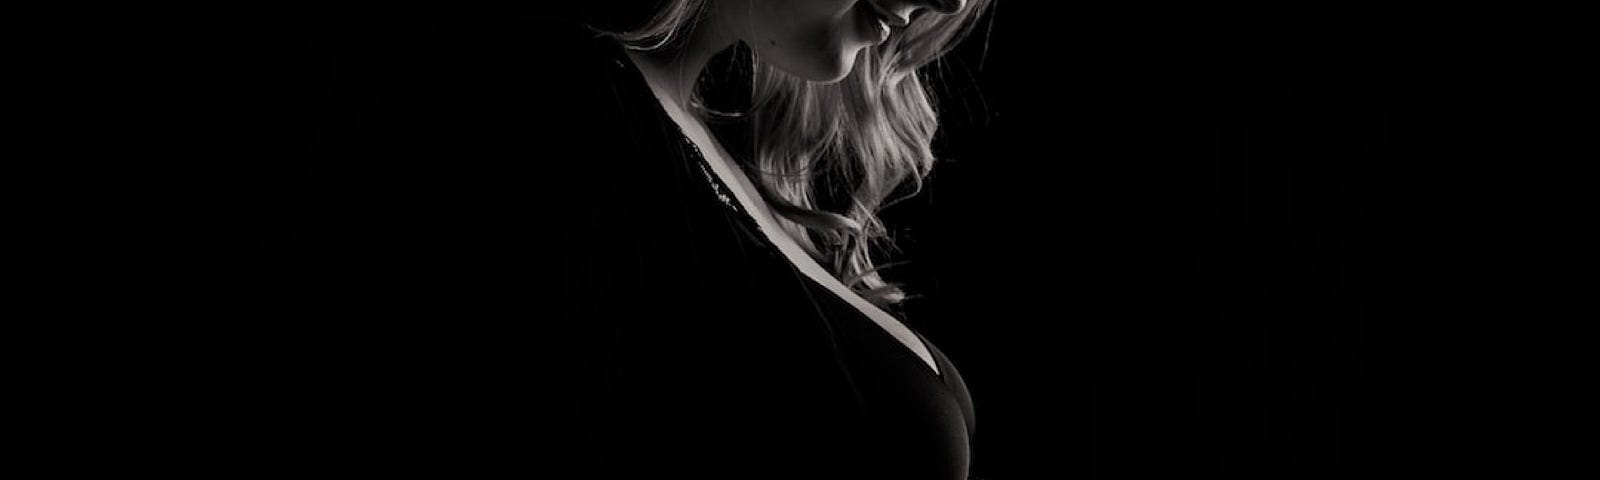 A young woman looks lovingly down as she stands before a black background, her left hand gently placed on her bare, pregnant belly.